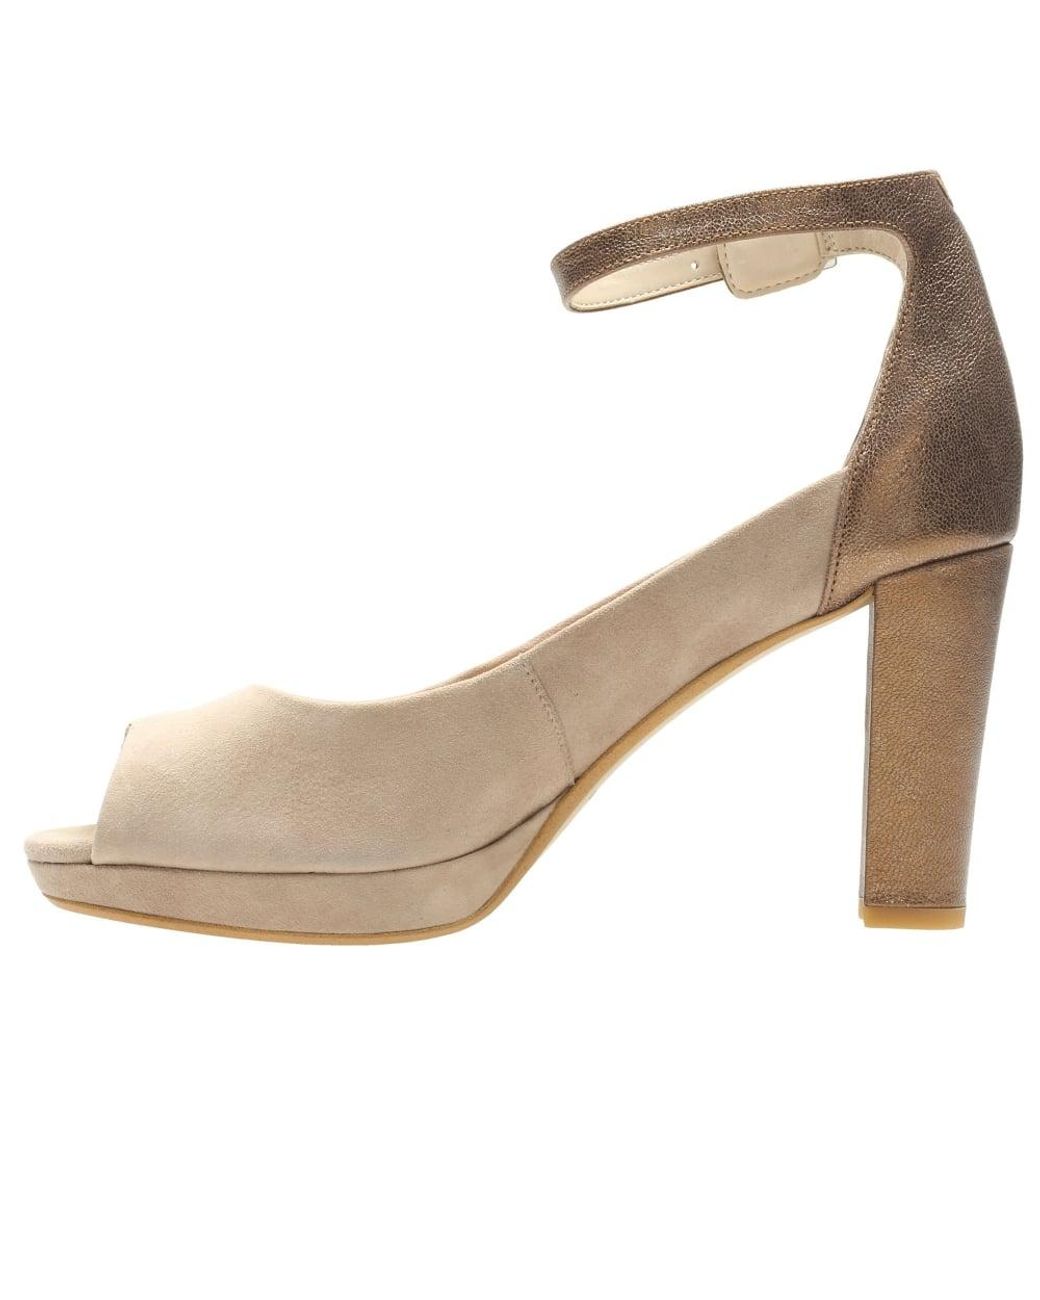 Clarks Suede Kendra Ella Womens Shoes in Natural | Lyst UK